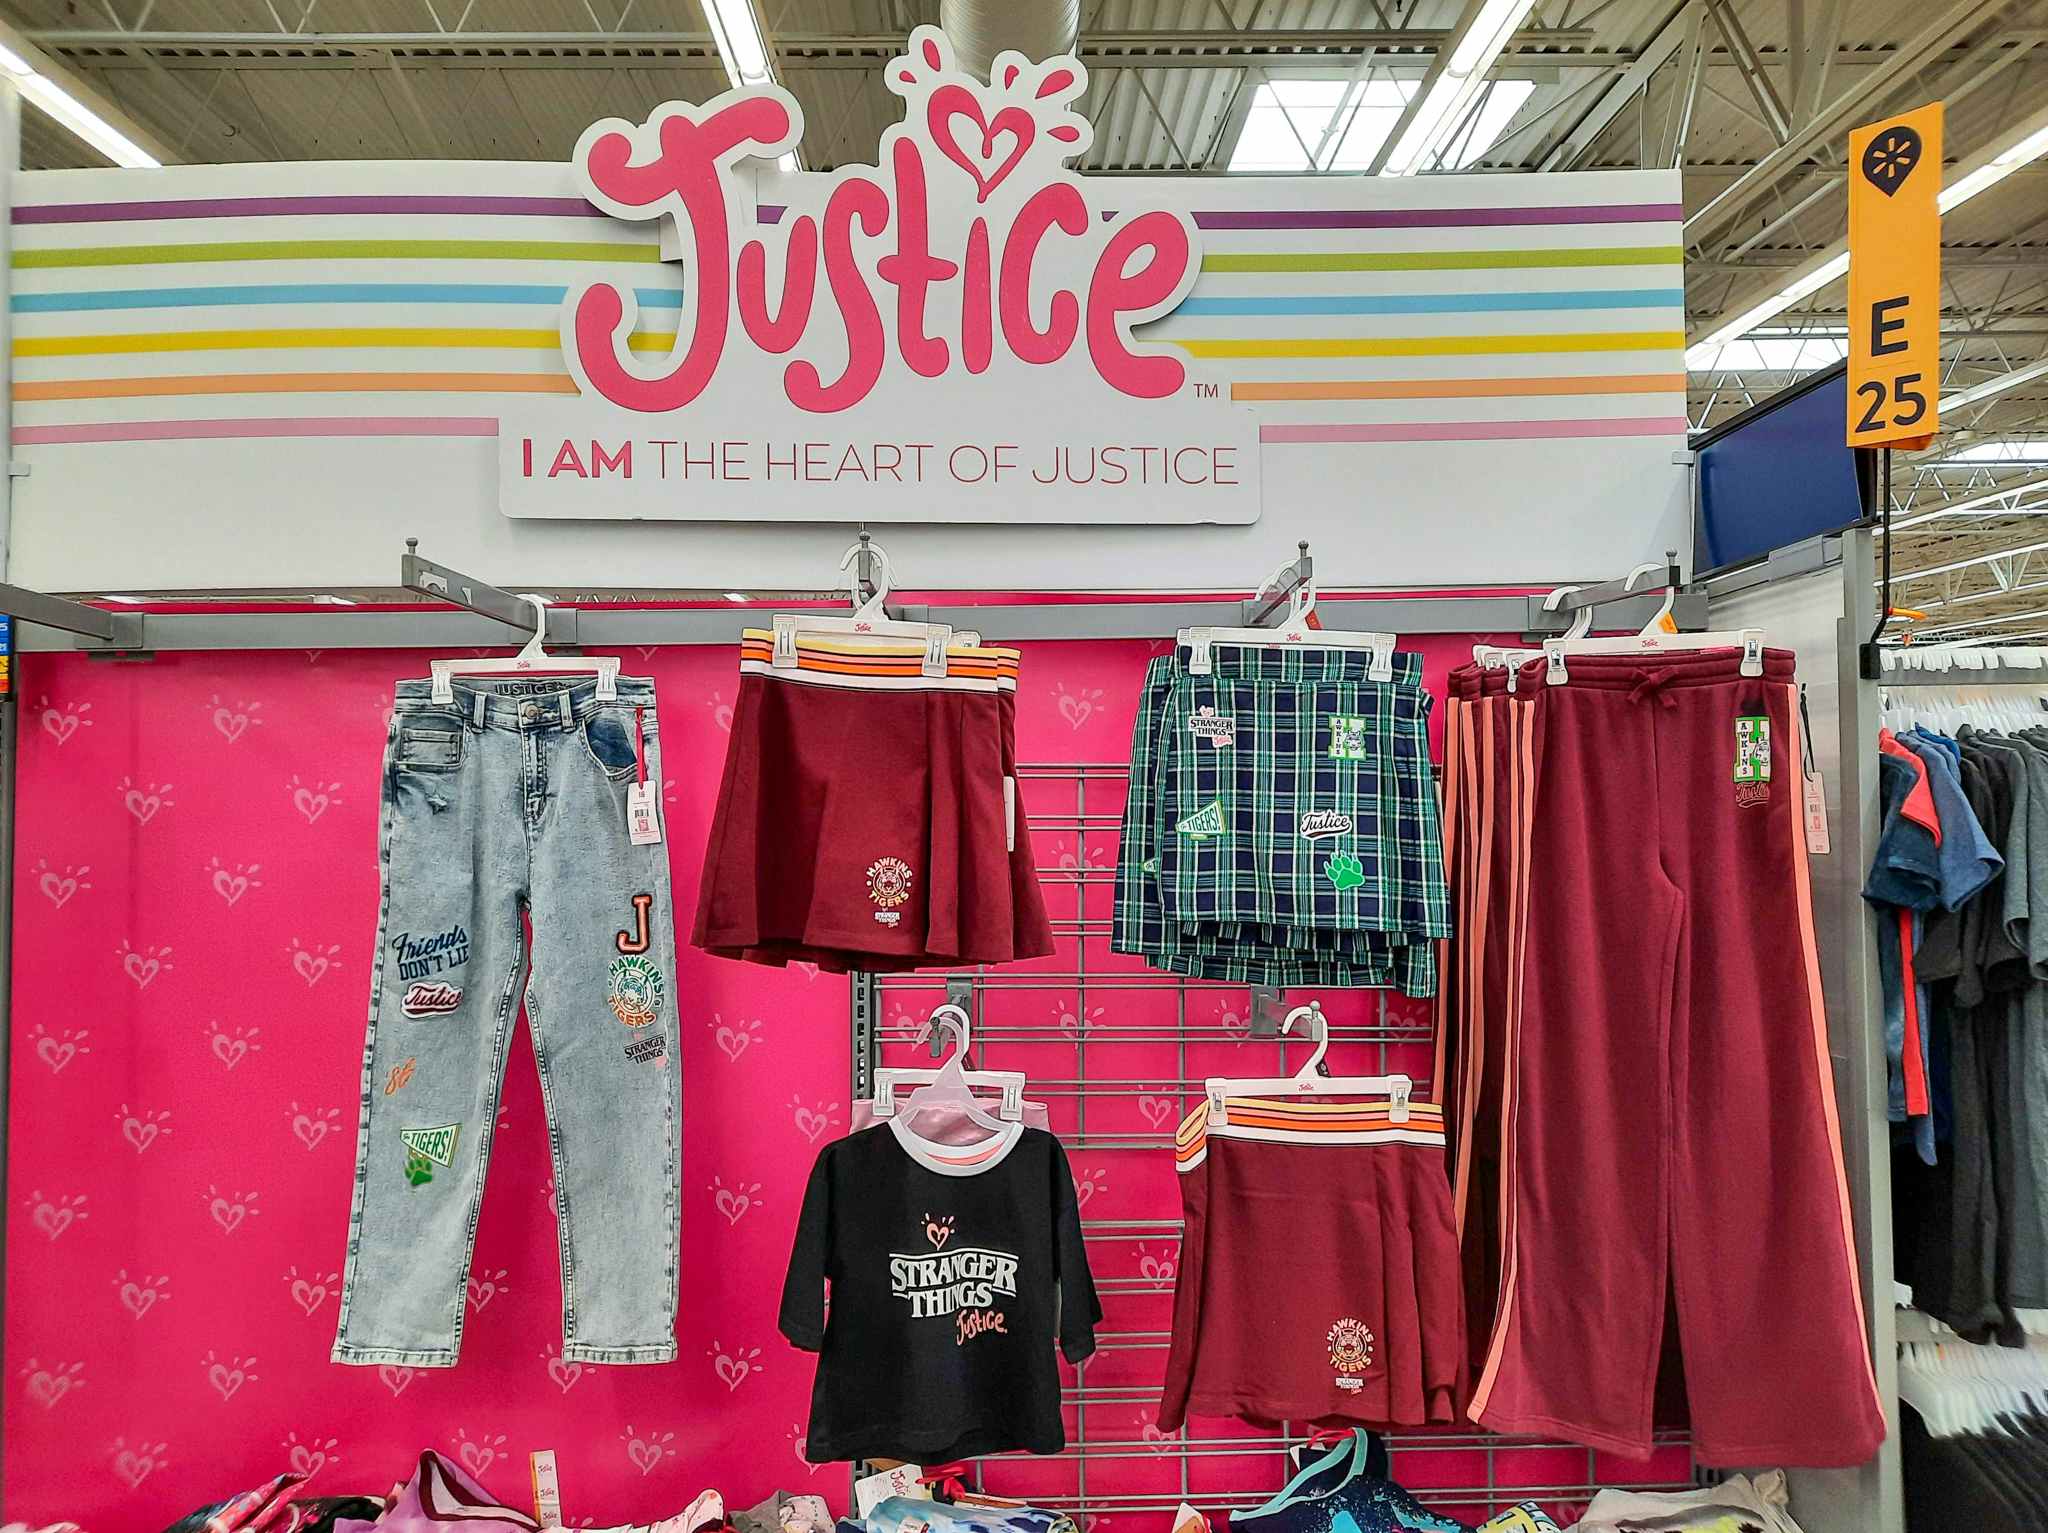 justice stranger things collection on display at walmart